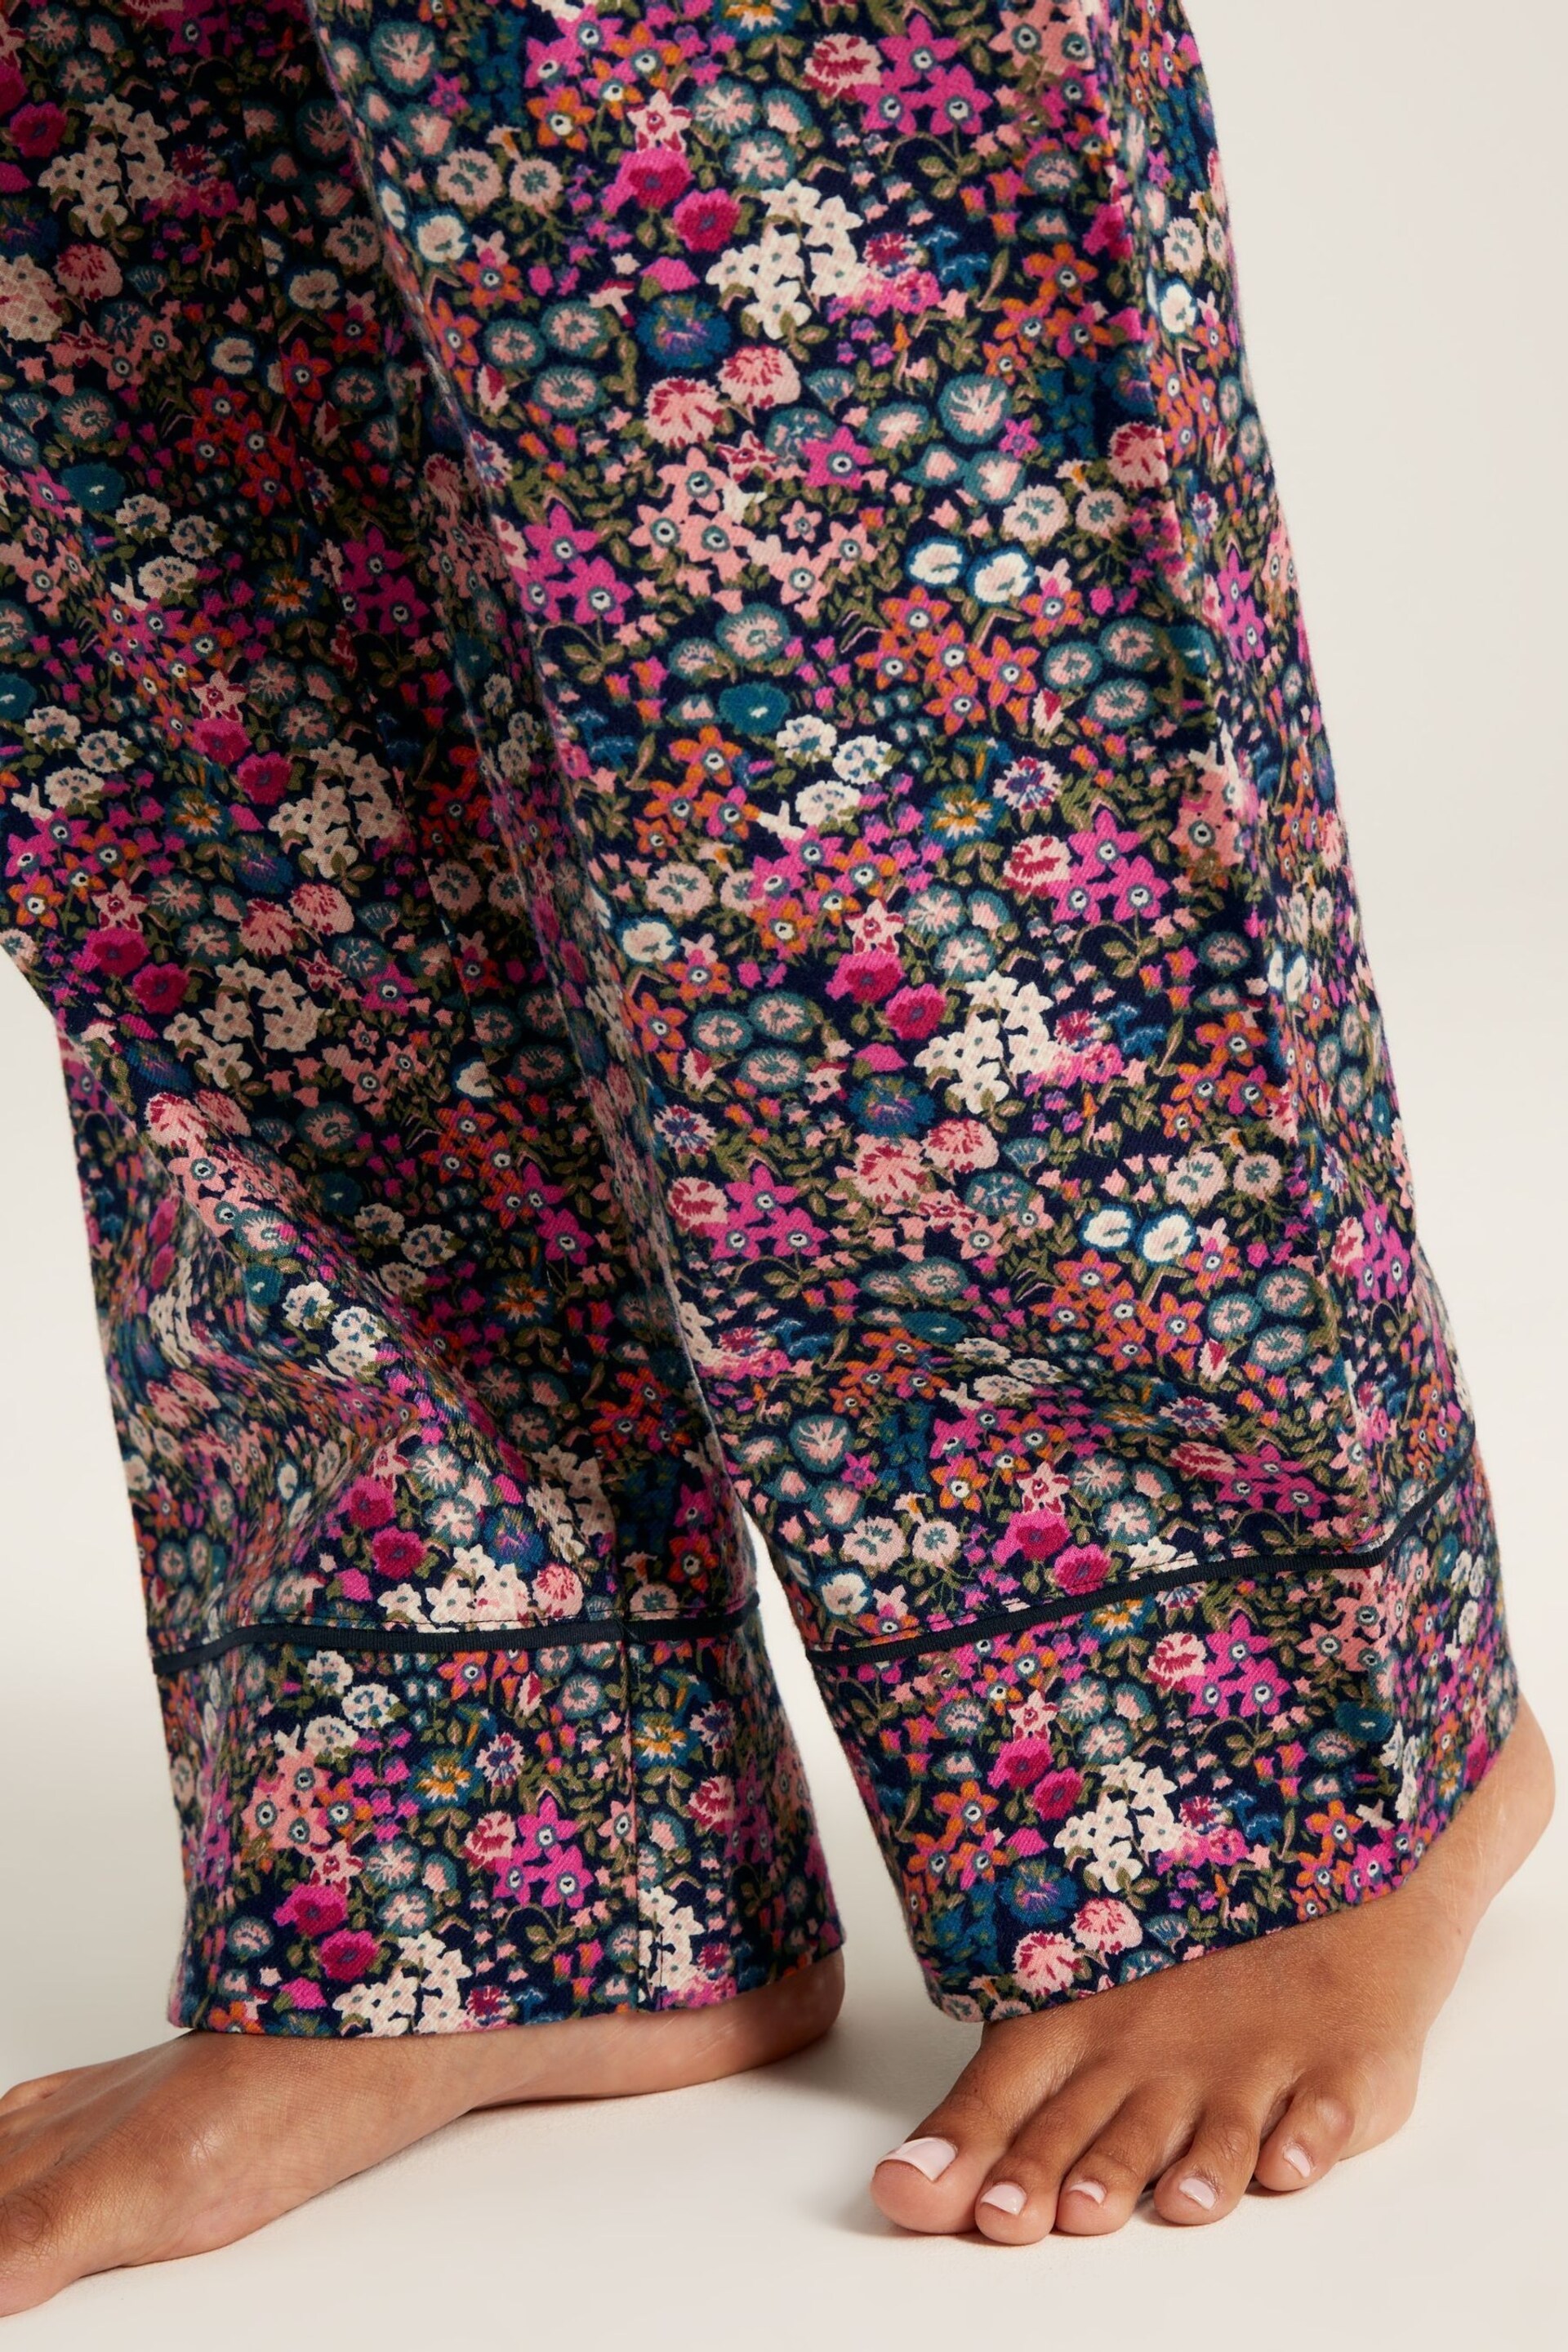 Joules Stella Navy Floral Cotton Pyjama Bottoms - Image 6 of 7